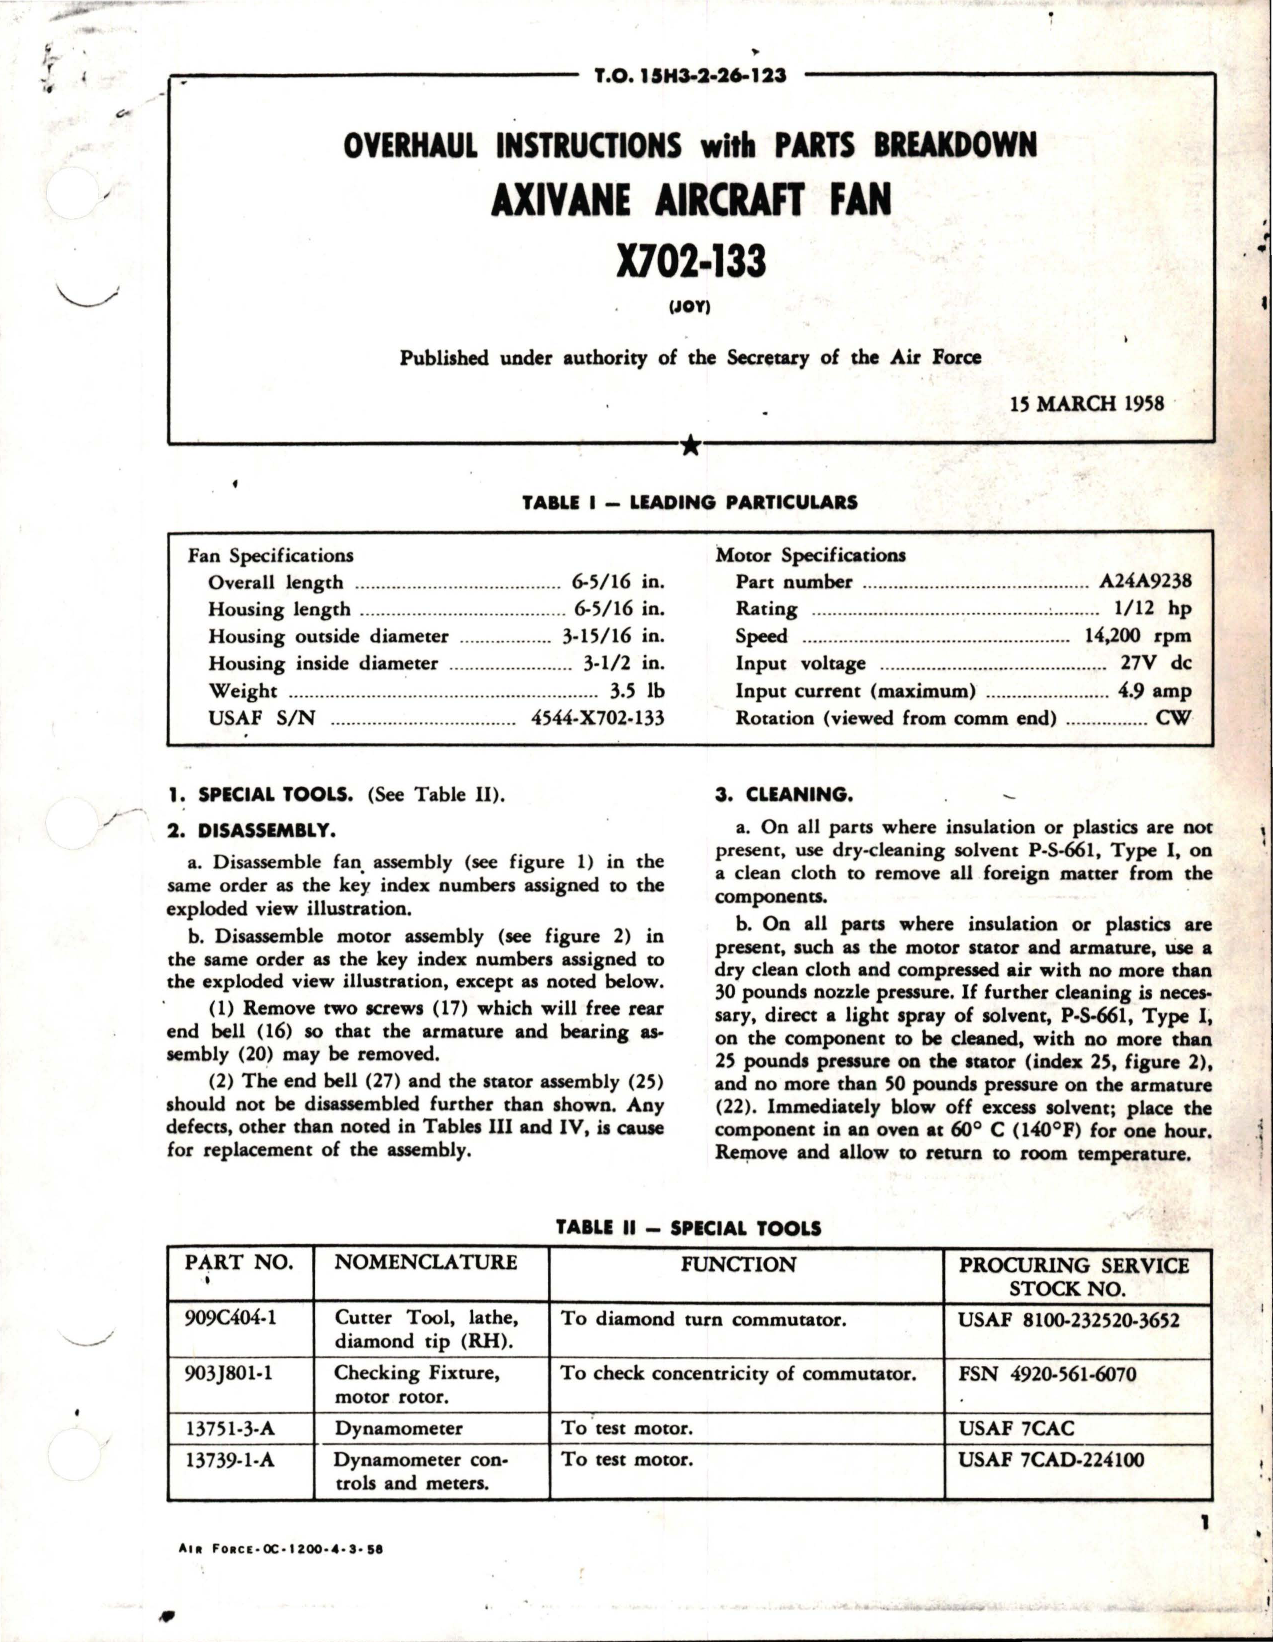 Sample page 1 from AirCorps Library document: Overhaul Instructions with Parts Breakdown for Axivane Aircraft Fan - X702-133 